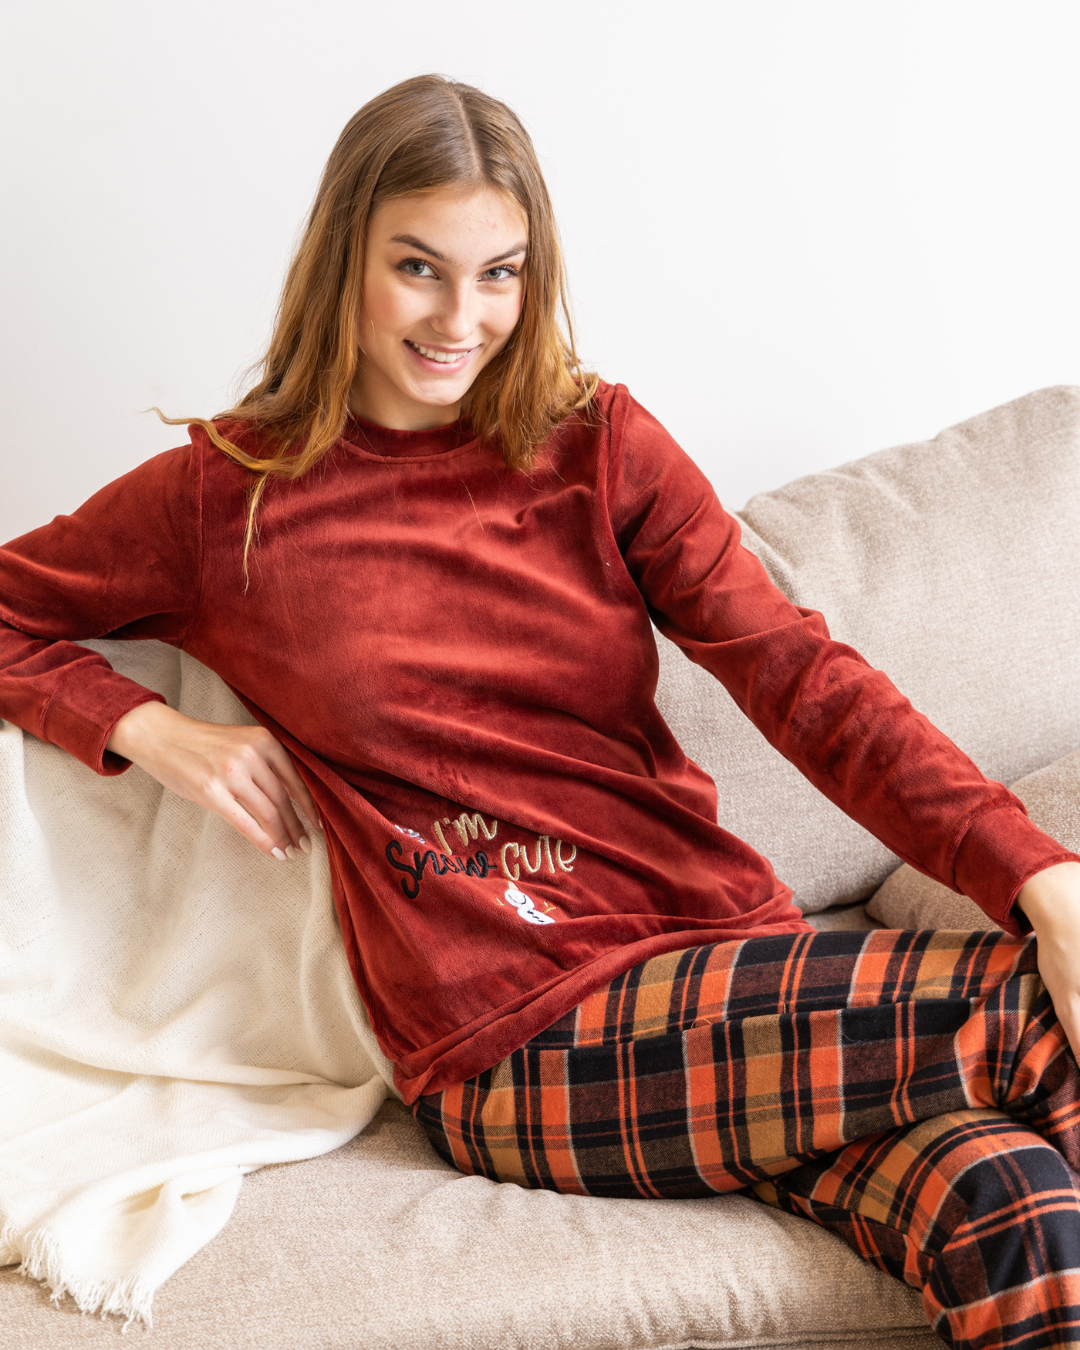 snow Women's pajamas, velvet, round neck, embroidered with check pants